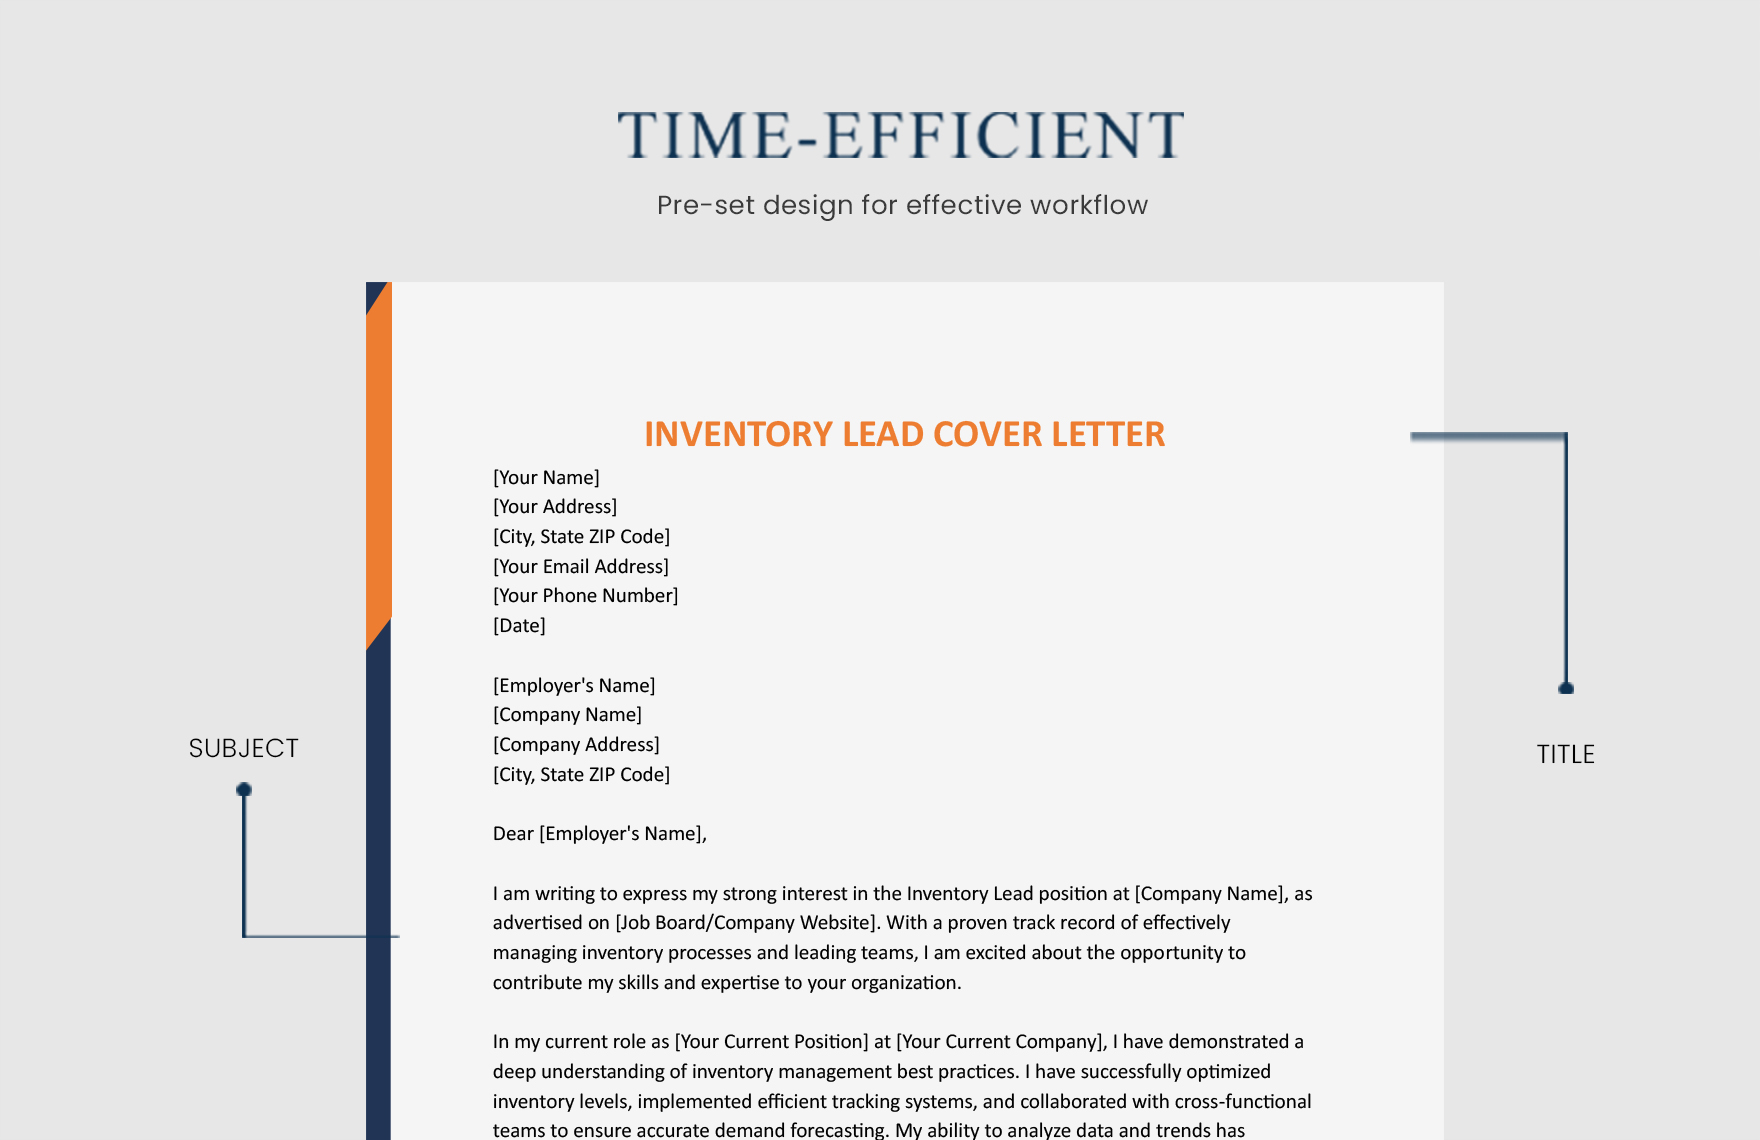 Inventory Lead Cover Letter